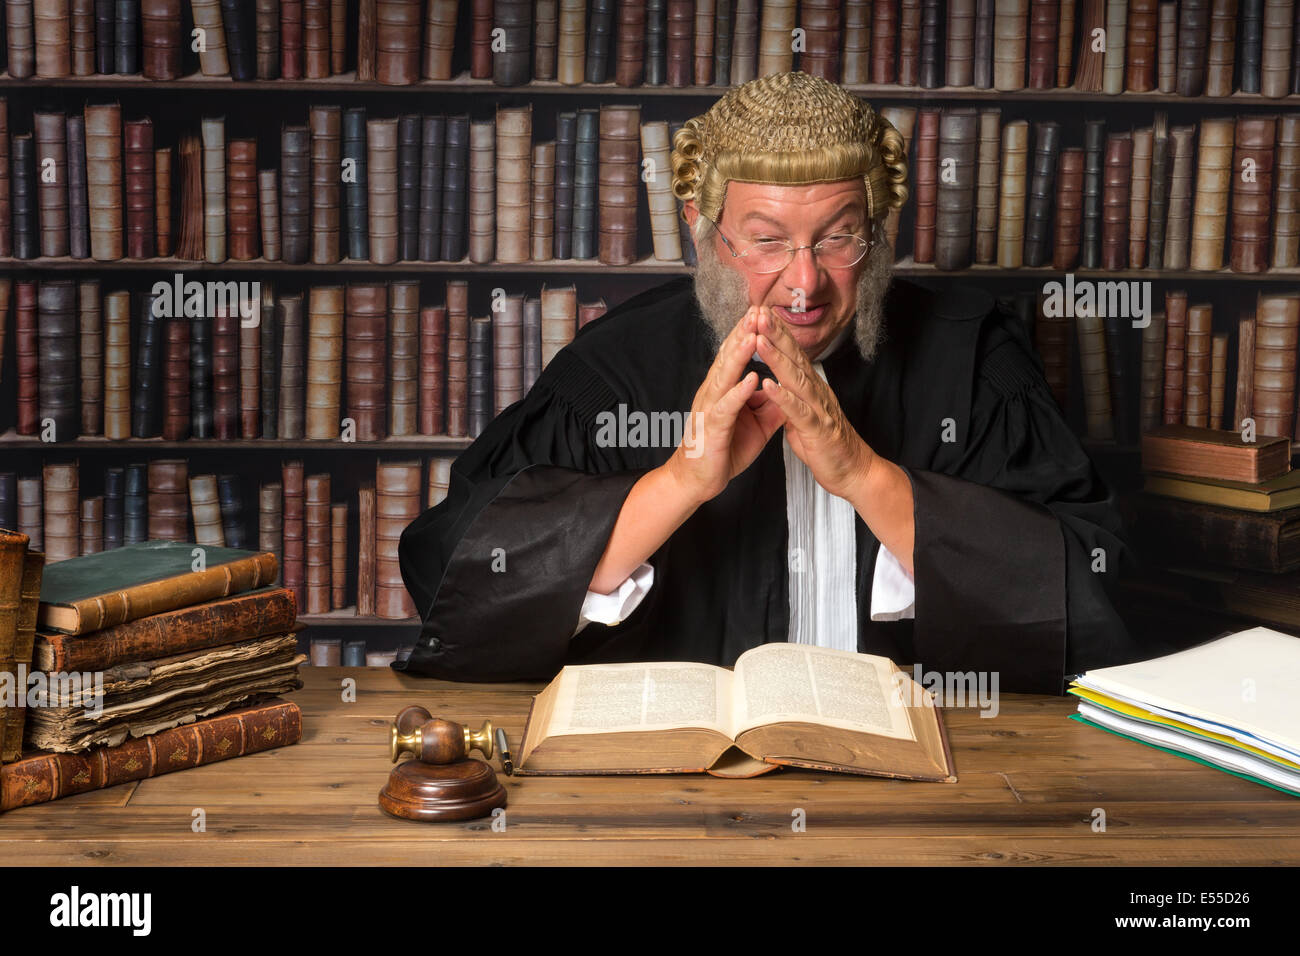 Mature judge in court consulting law books Stock Photo